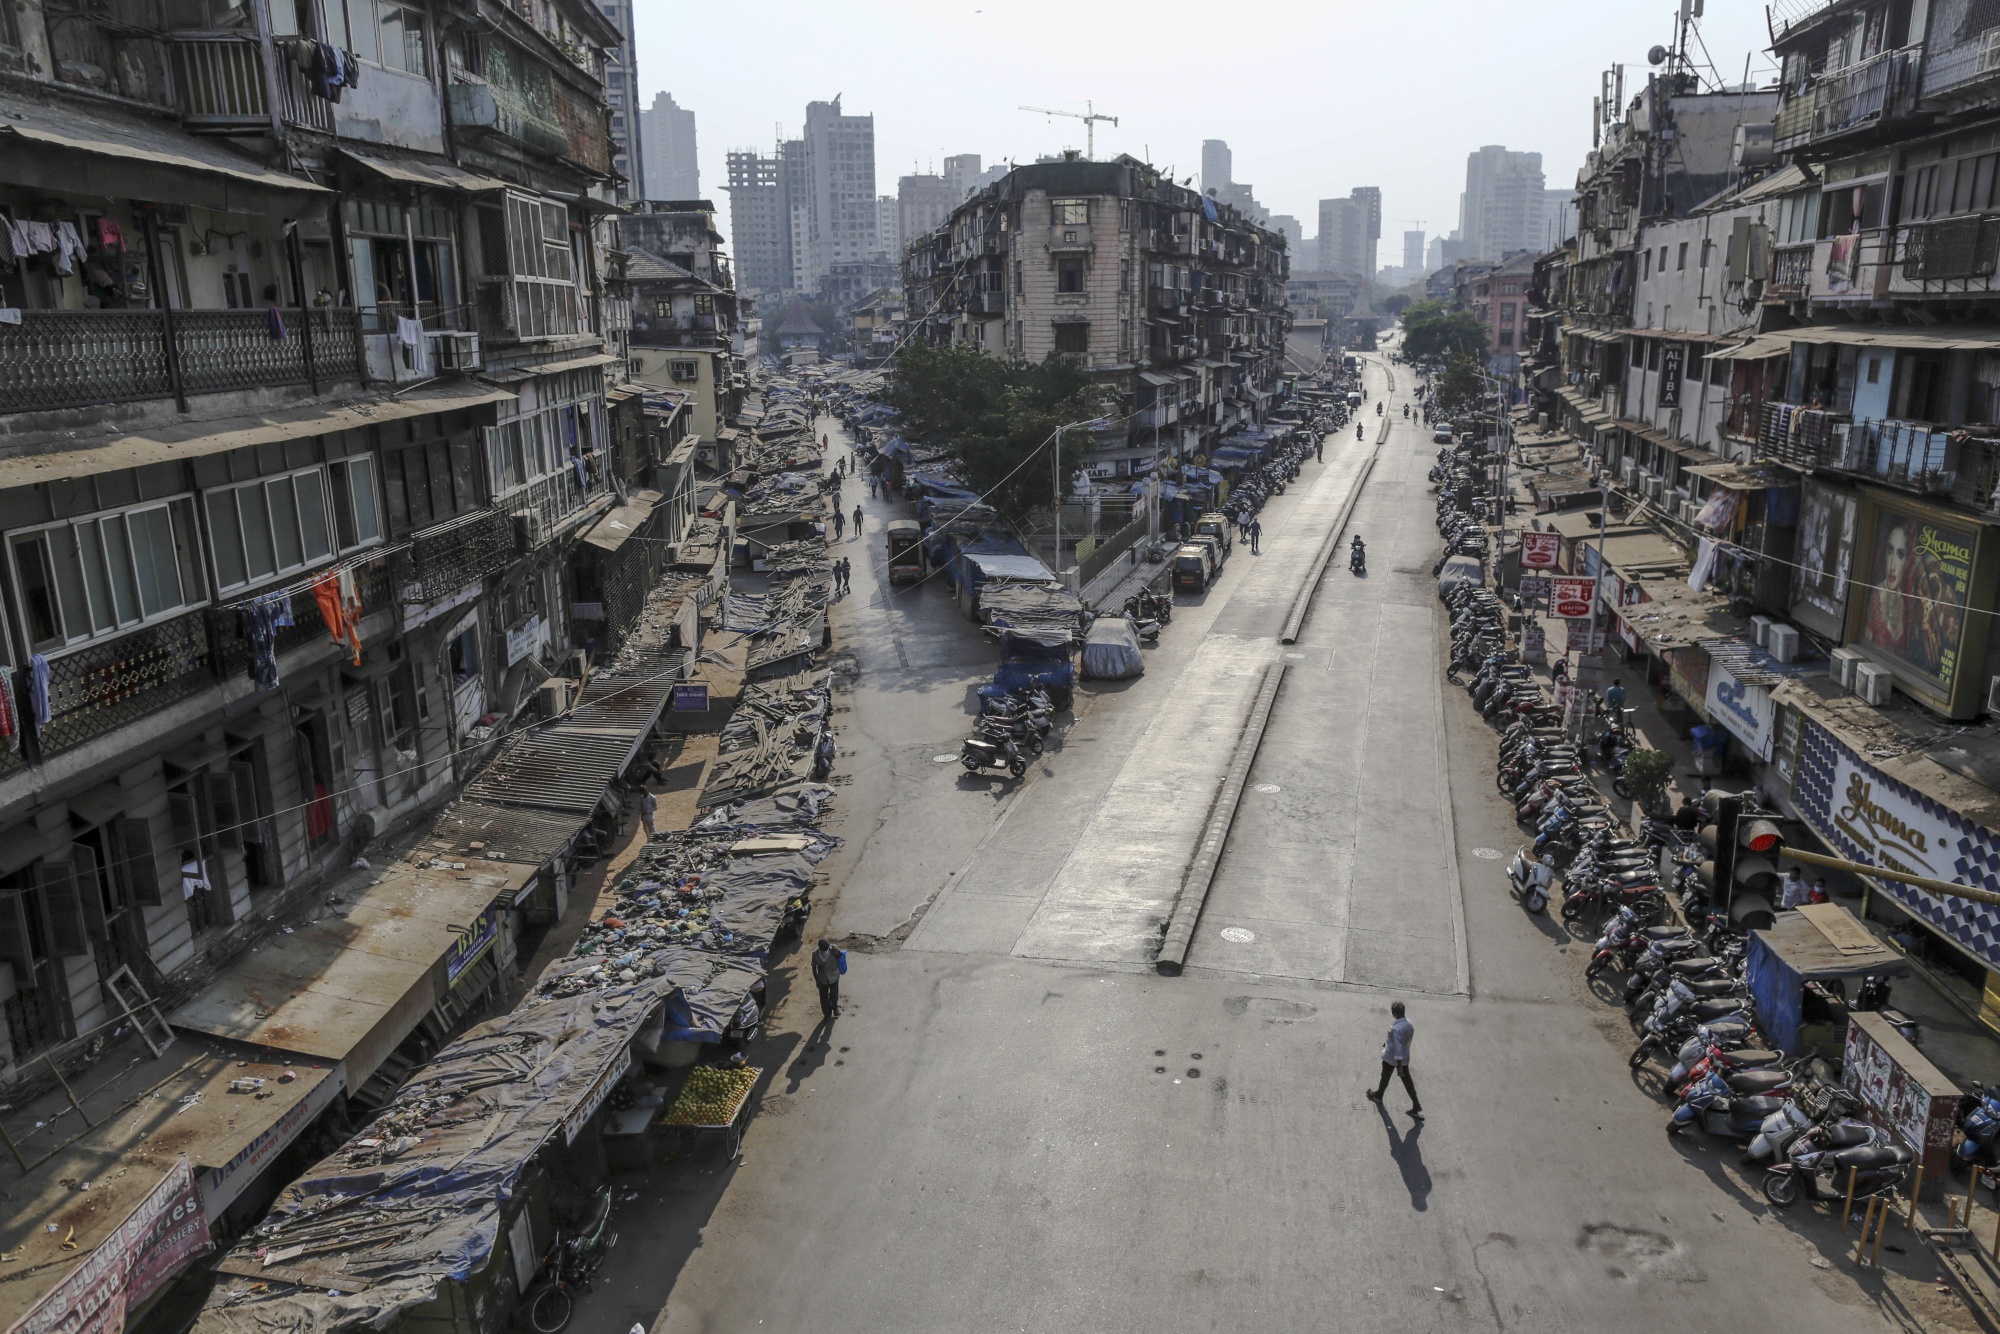 Pedestrians walk along near-empty roads during a lockdown in Mumbai, India, on March 25.